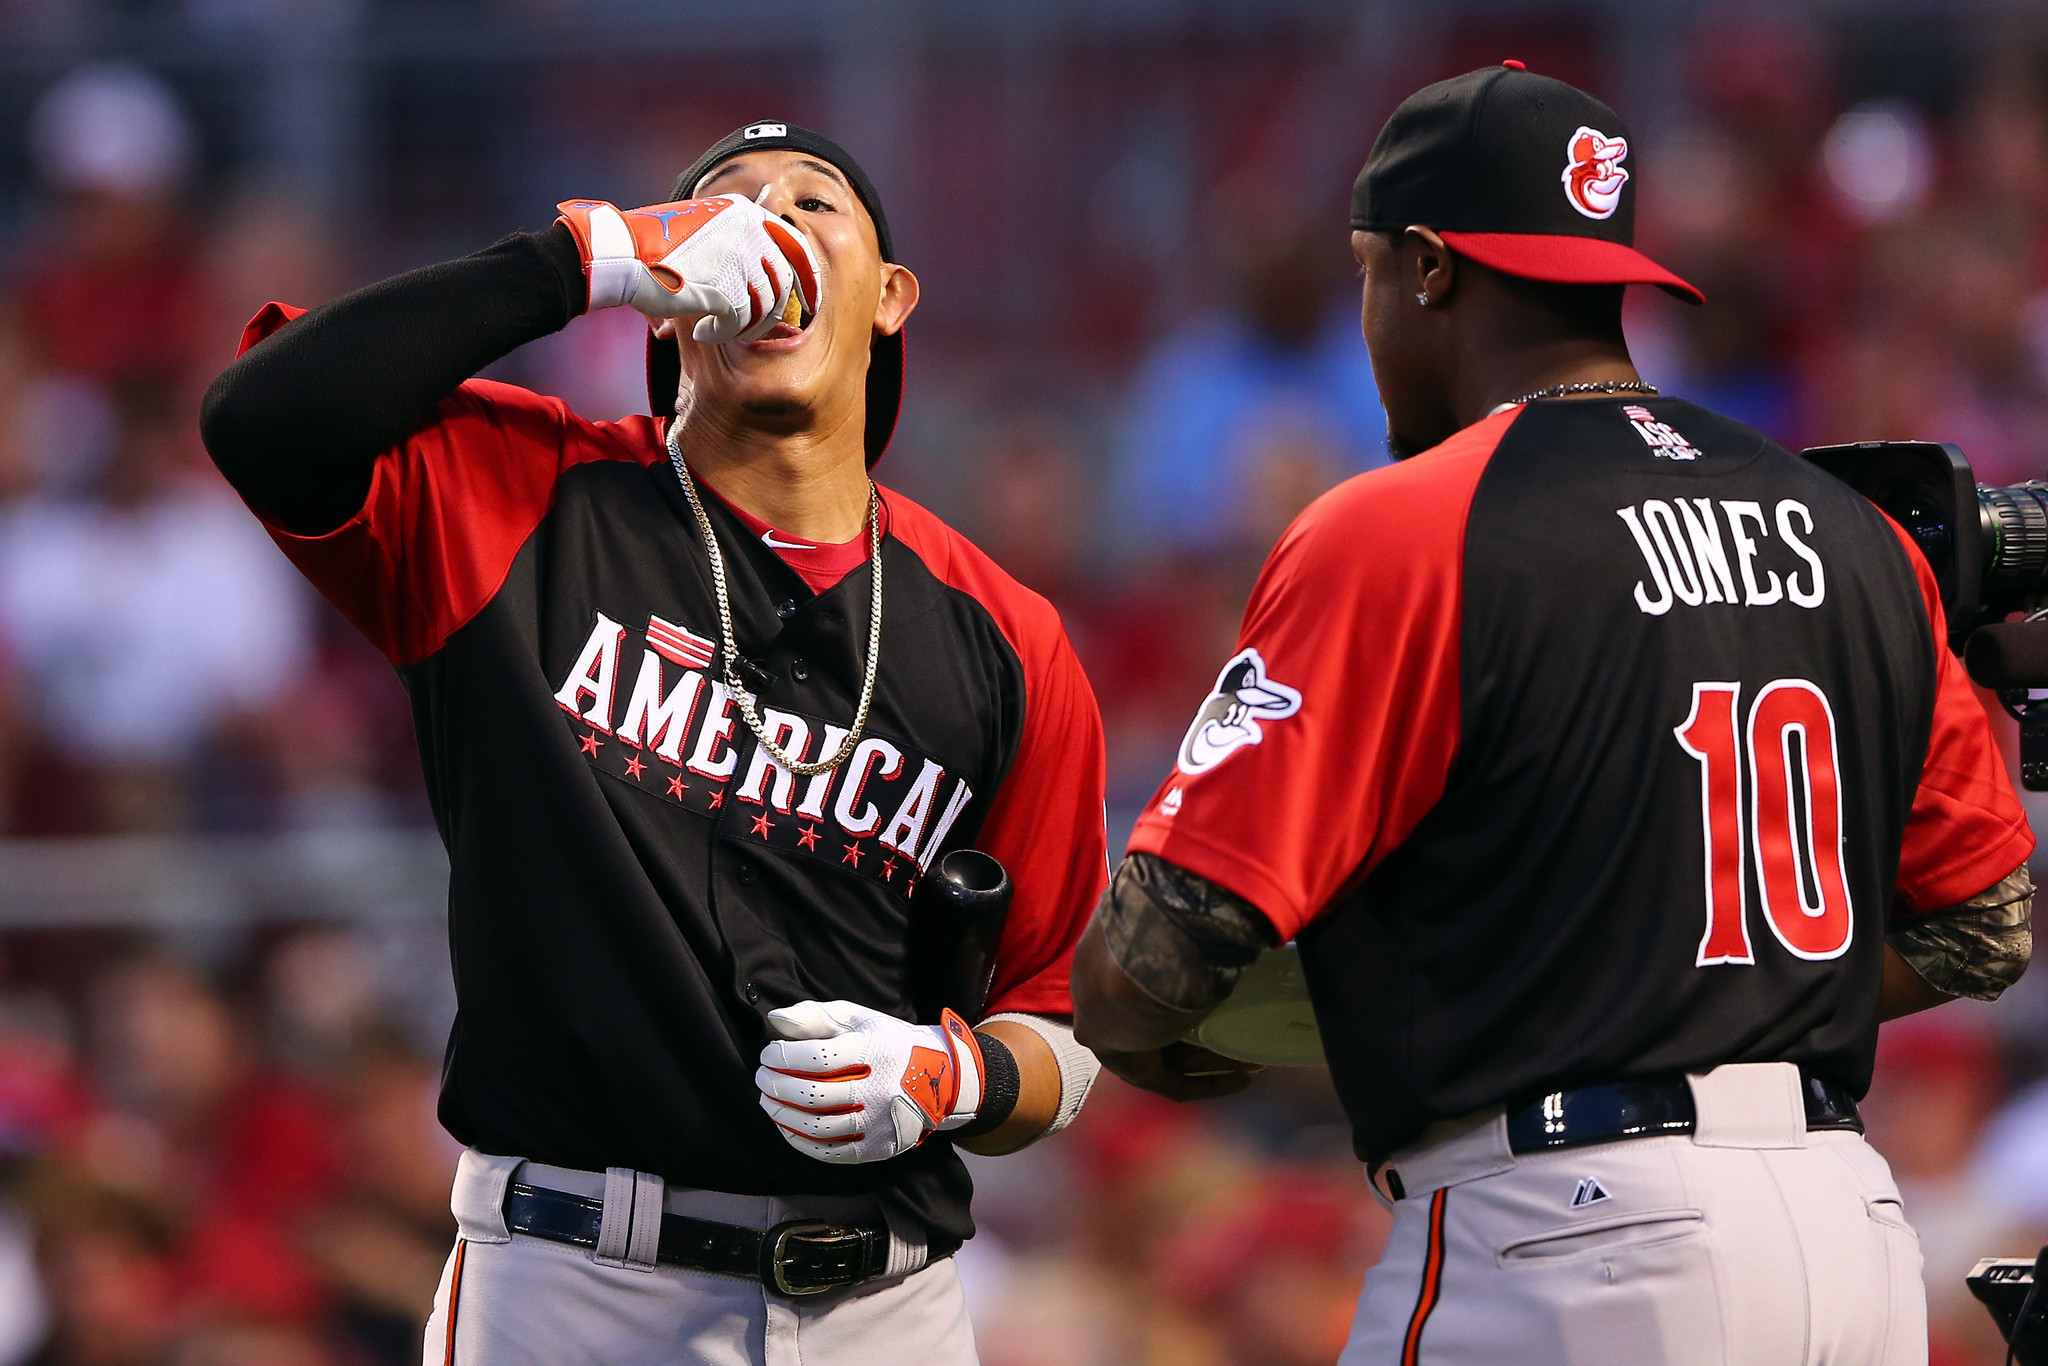 2013 MLB All Star Game: Get to know Baltimore Orioles All Star